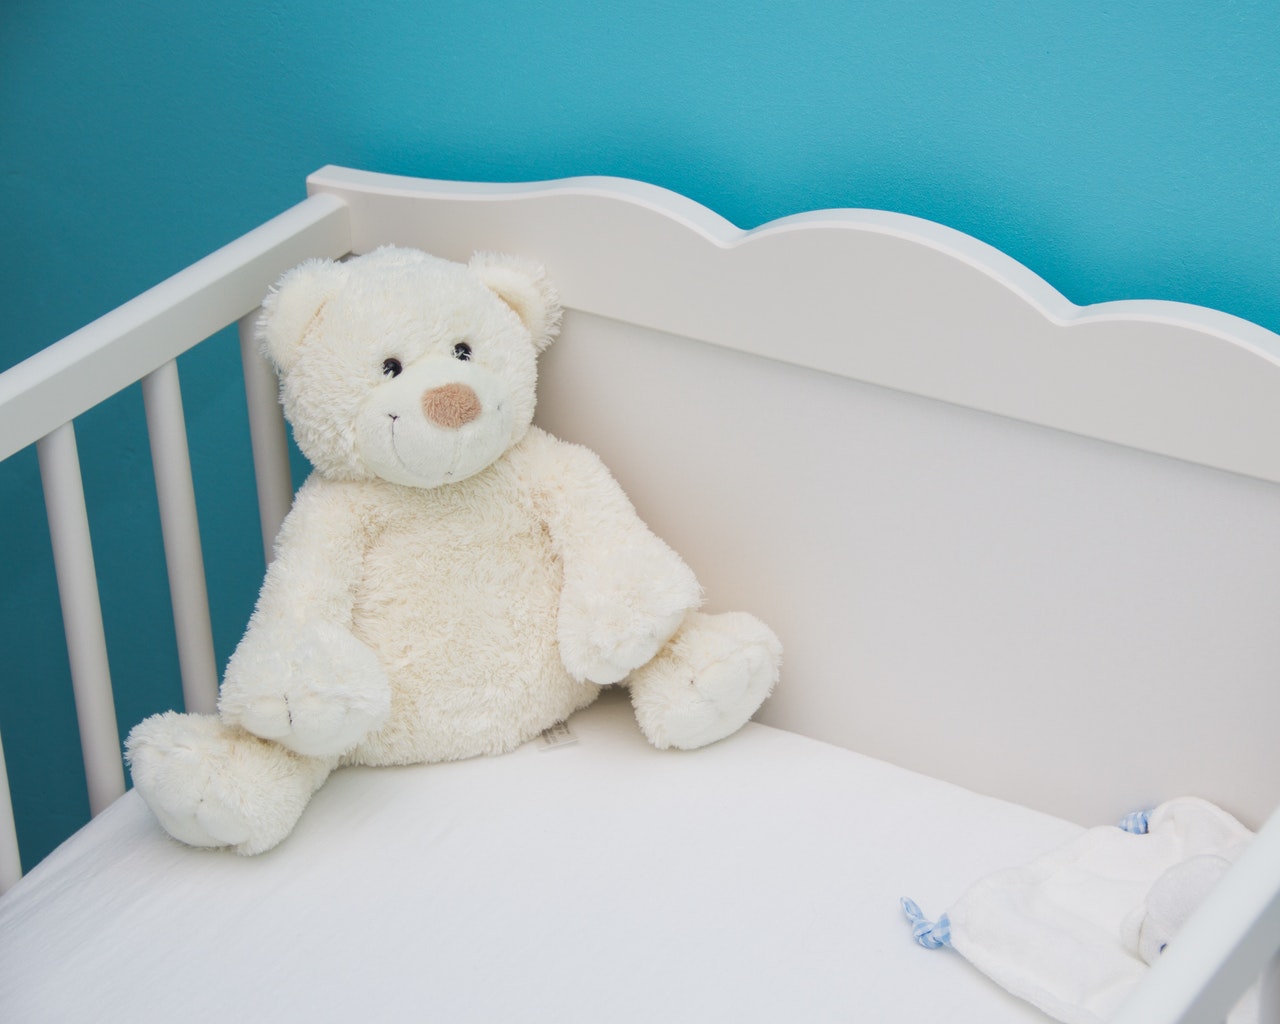 Swaddle or Sleeping Bag: White Teddy Bear in Baby Cot